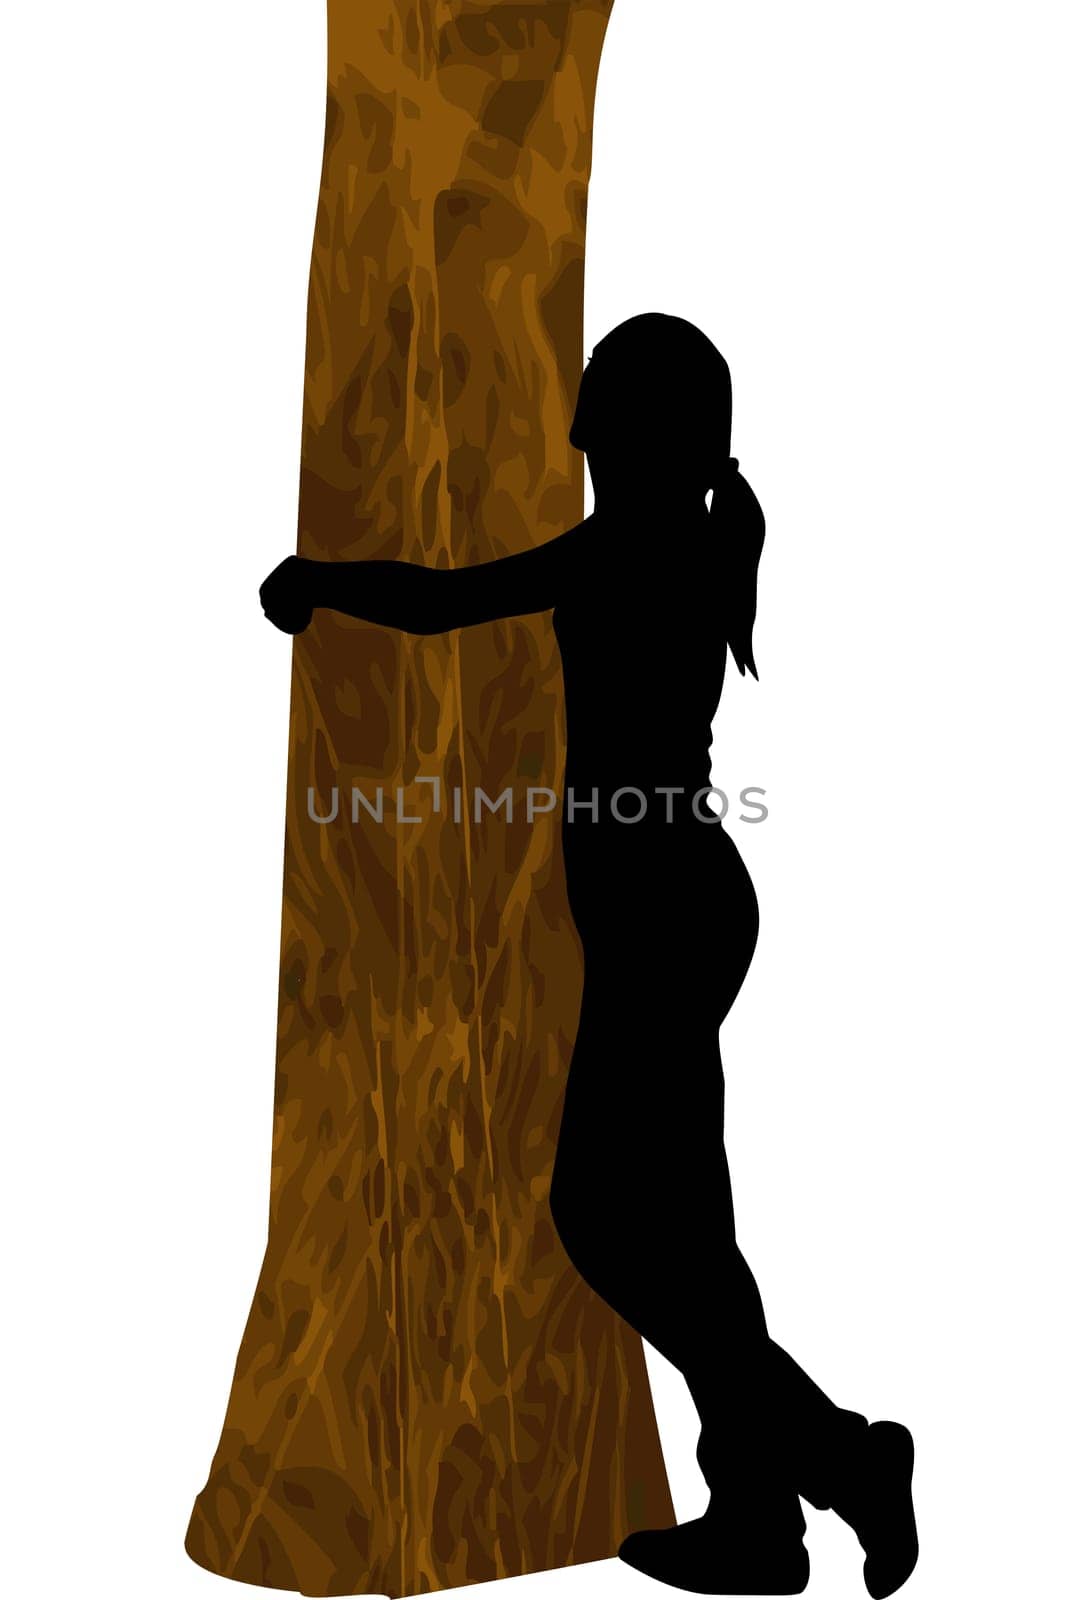 Silhouette of a girl hugging a tree trunk by hibrida13